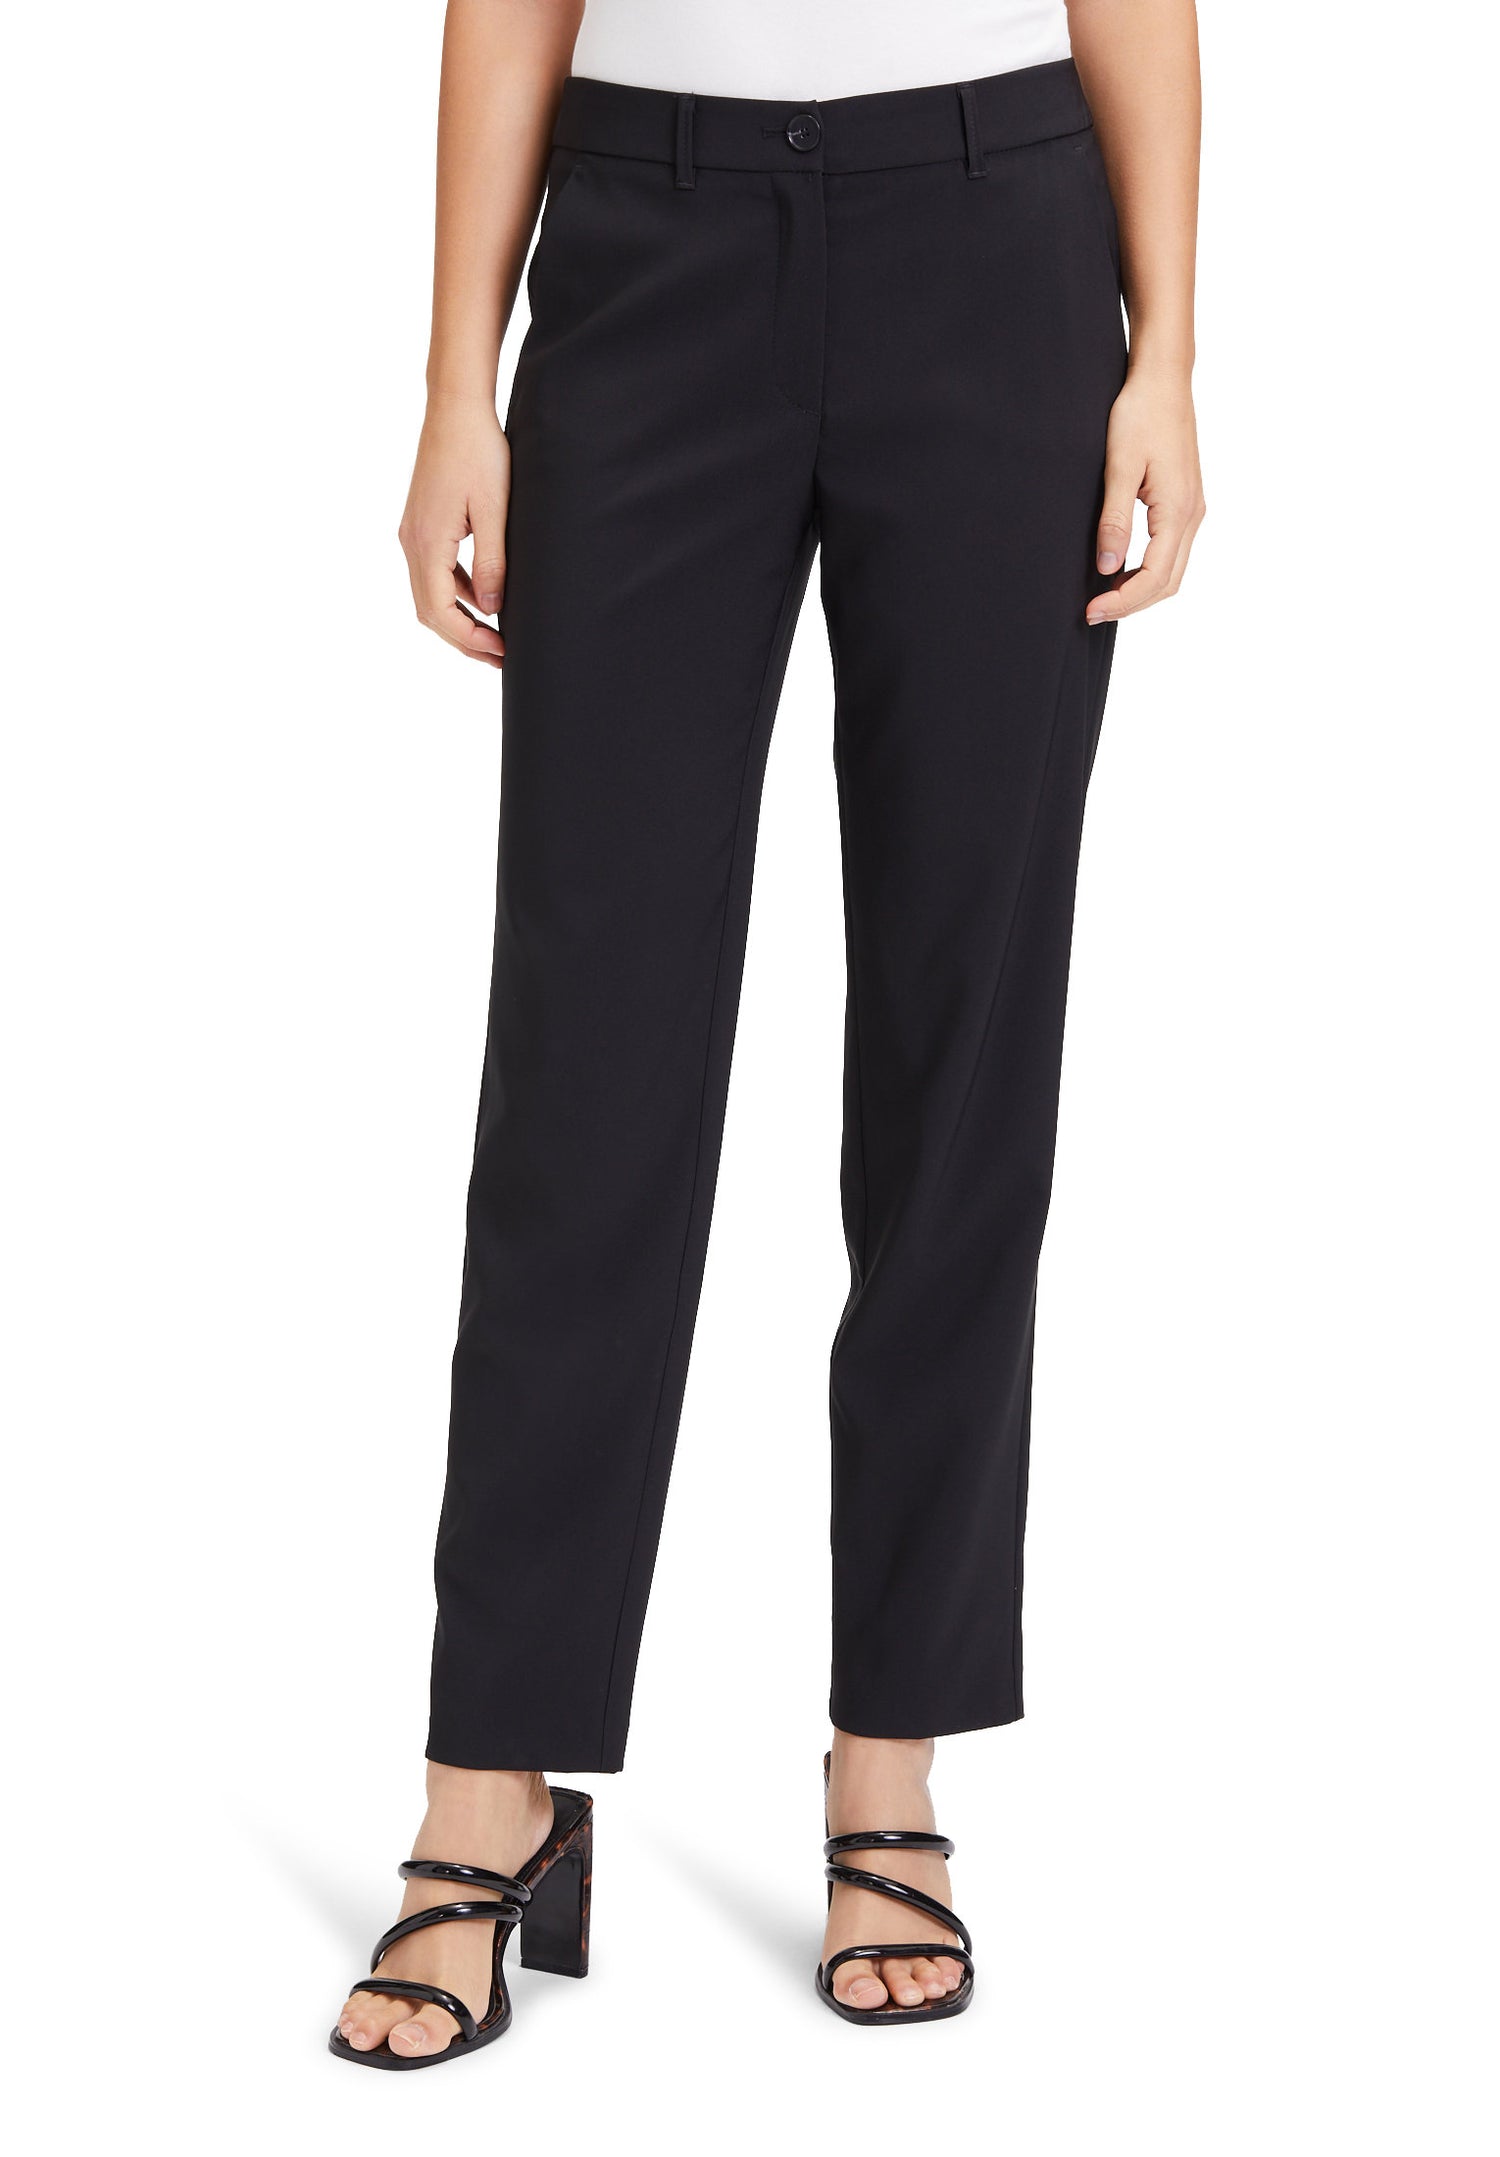 Business Trousers
With Crease_6002-1080_9045_05